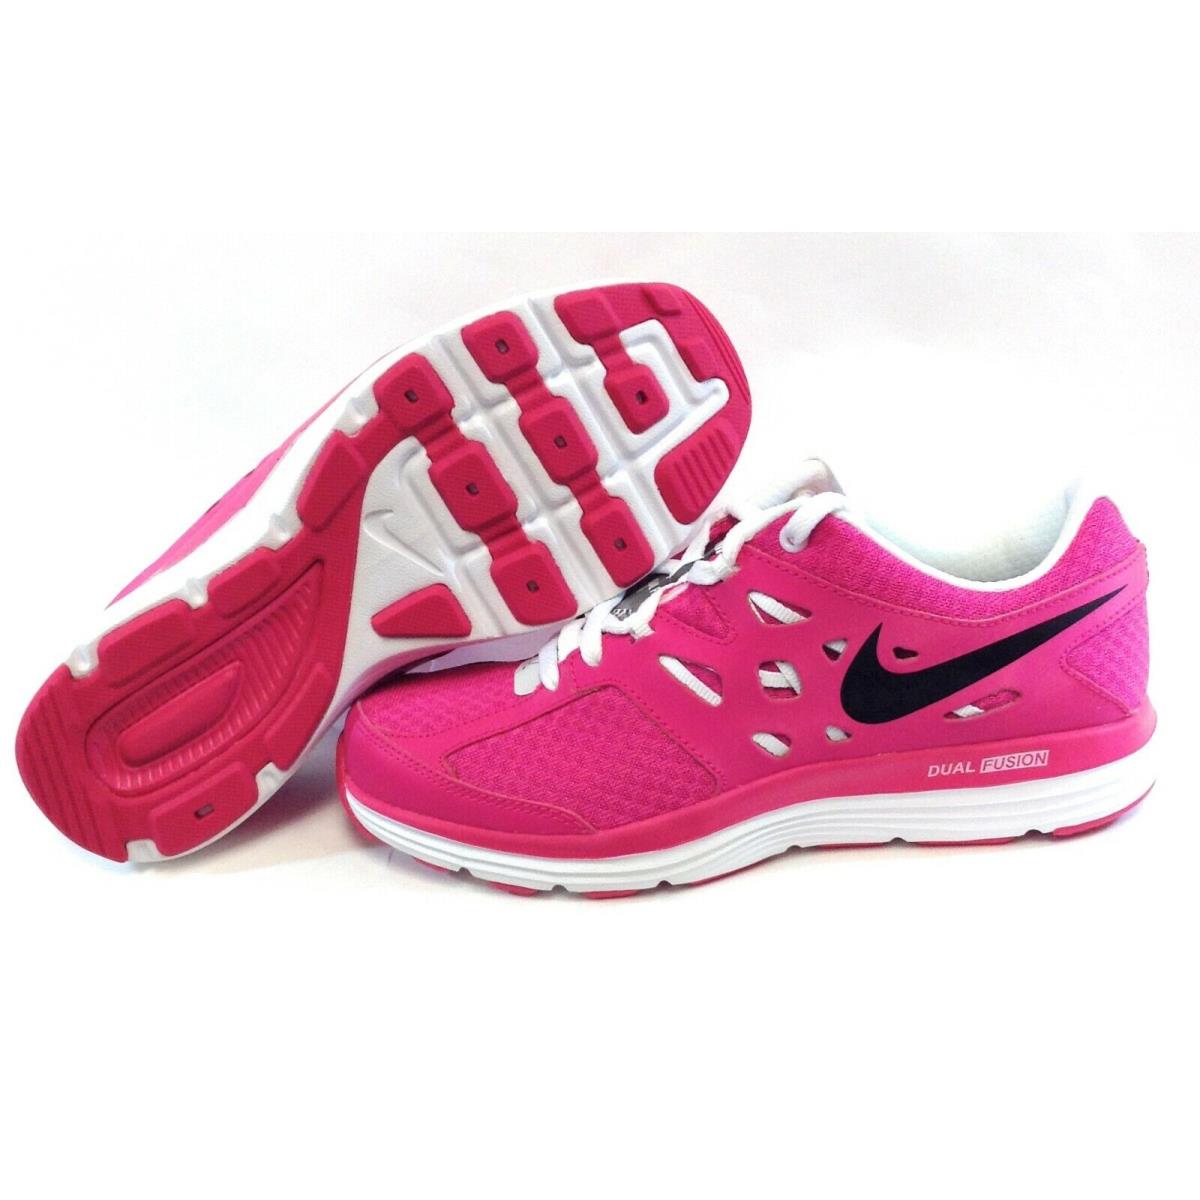 Girls Kids Youth Nike Dual Fusion Lite 599295 602 Pink 2014 DS Sneakers Shoes - Pink